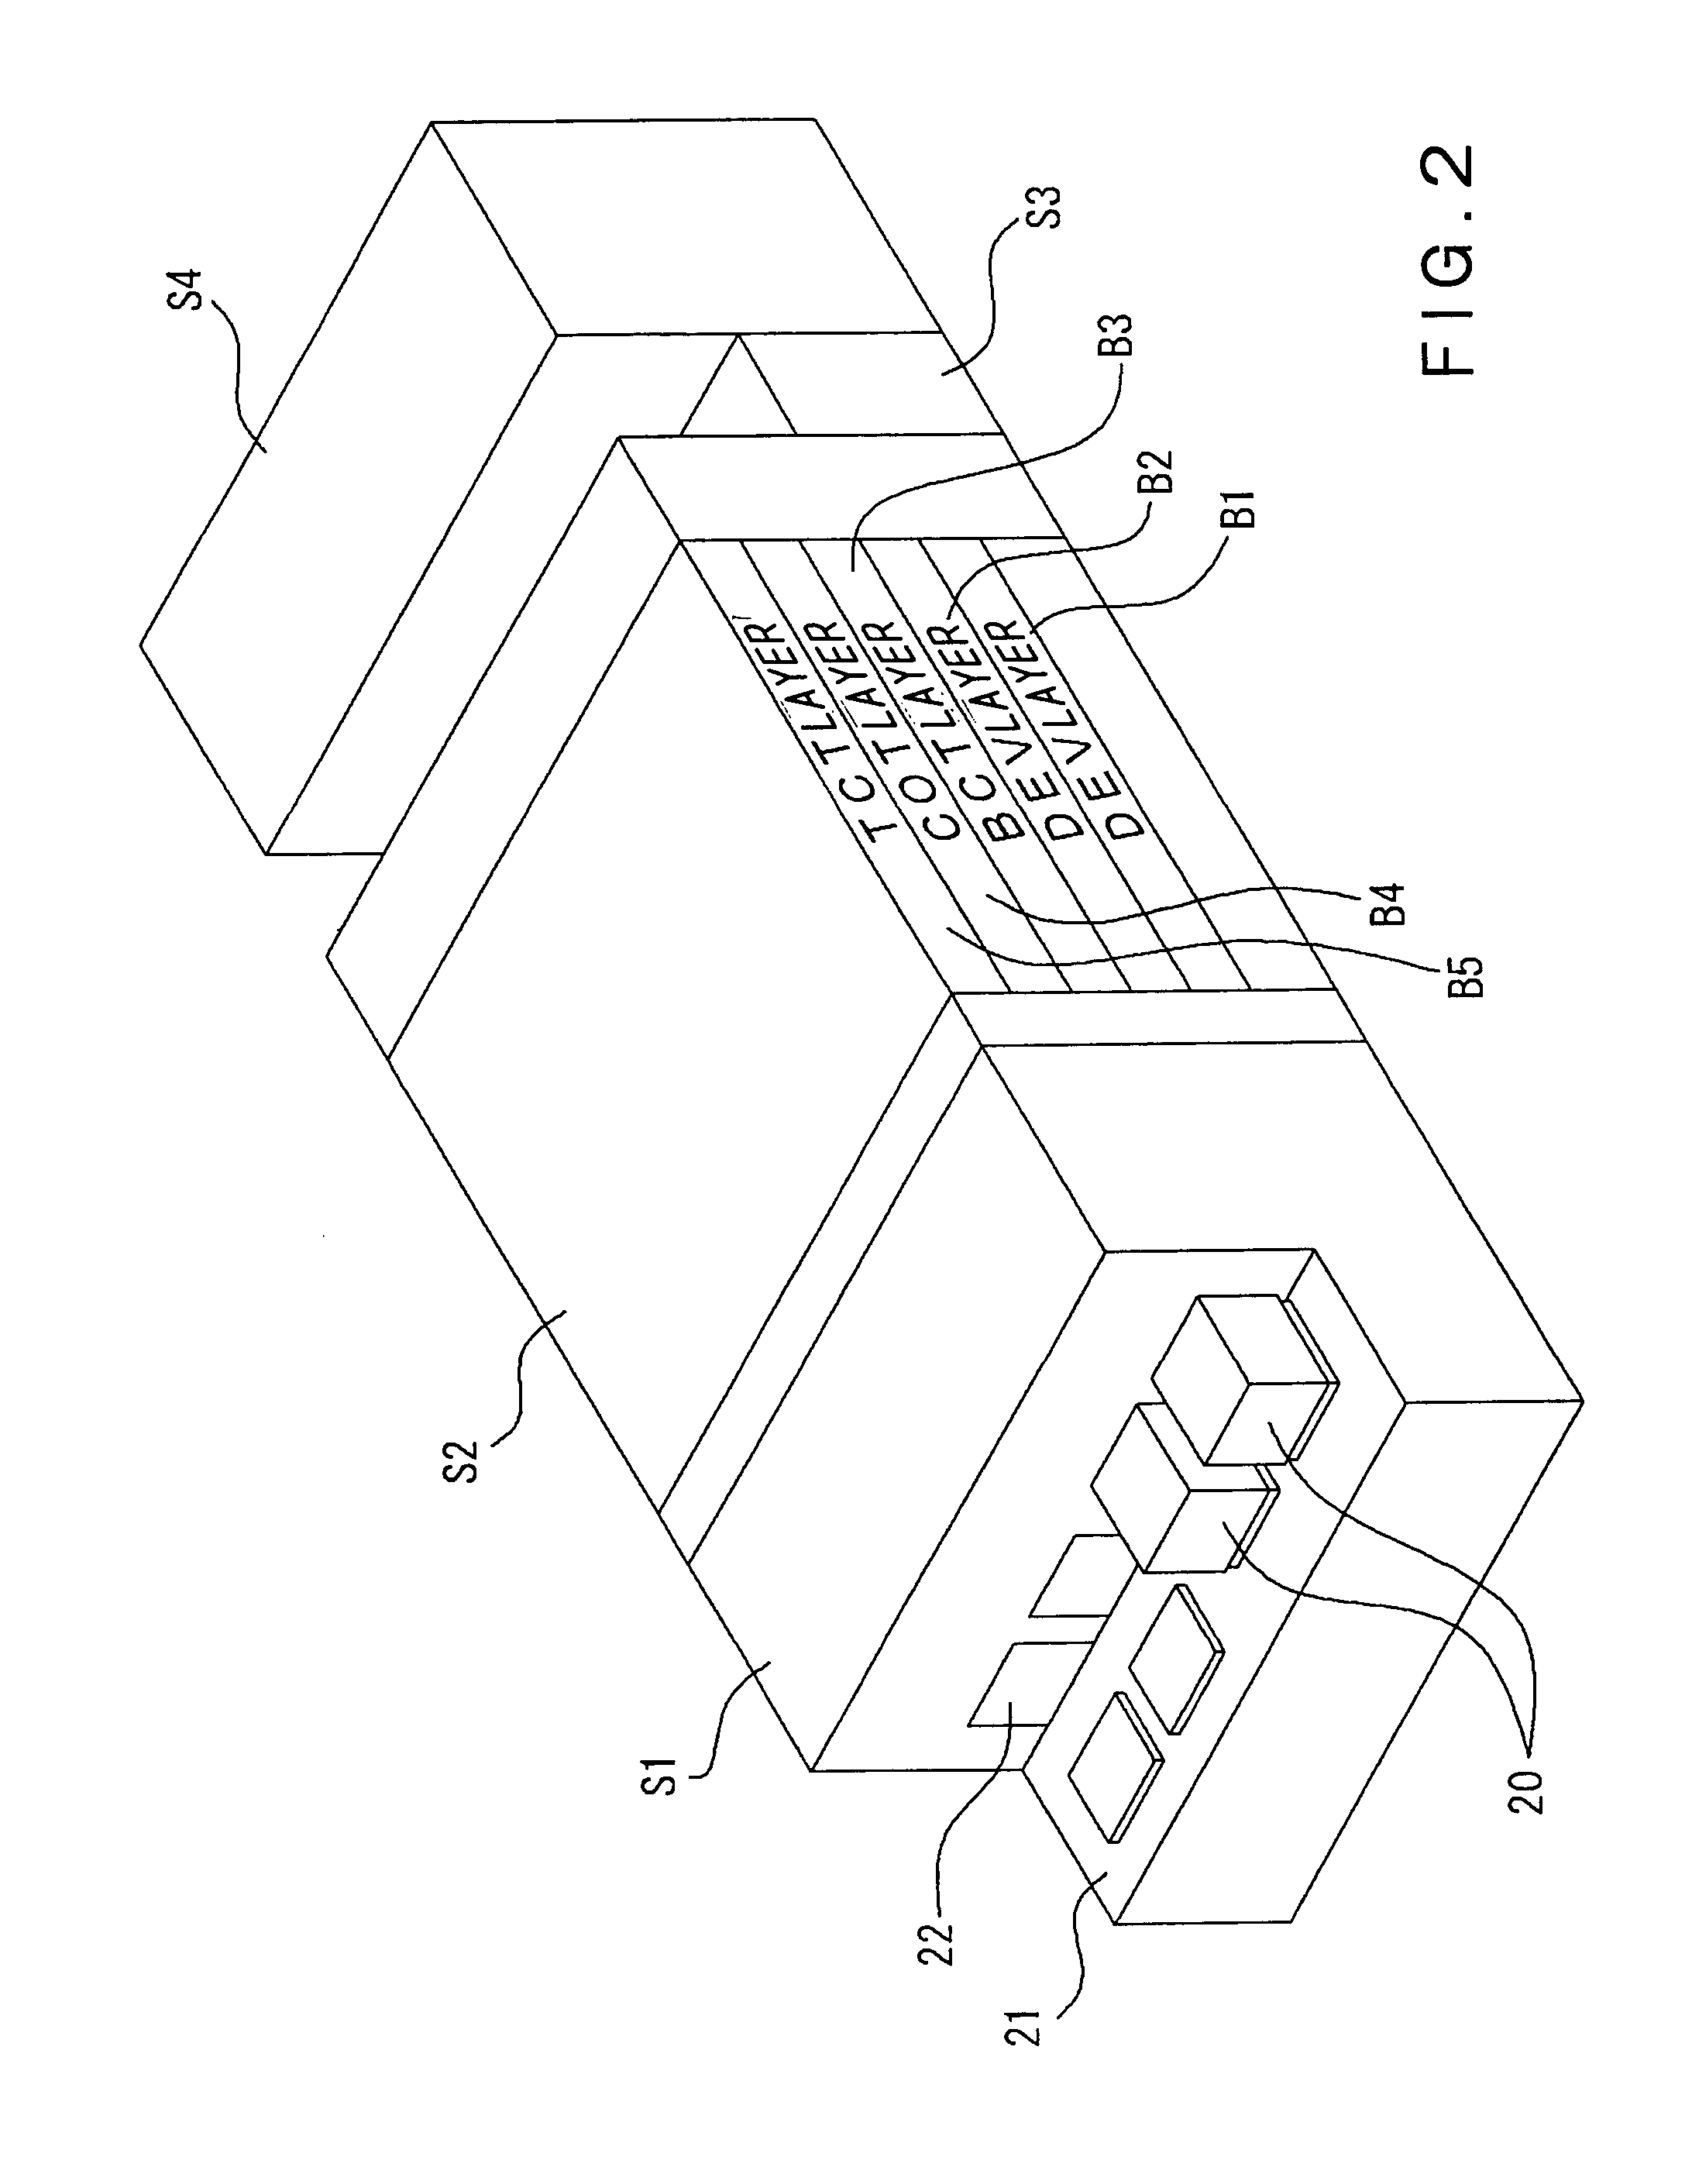 Substrate carrying and processing apparatus